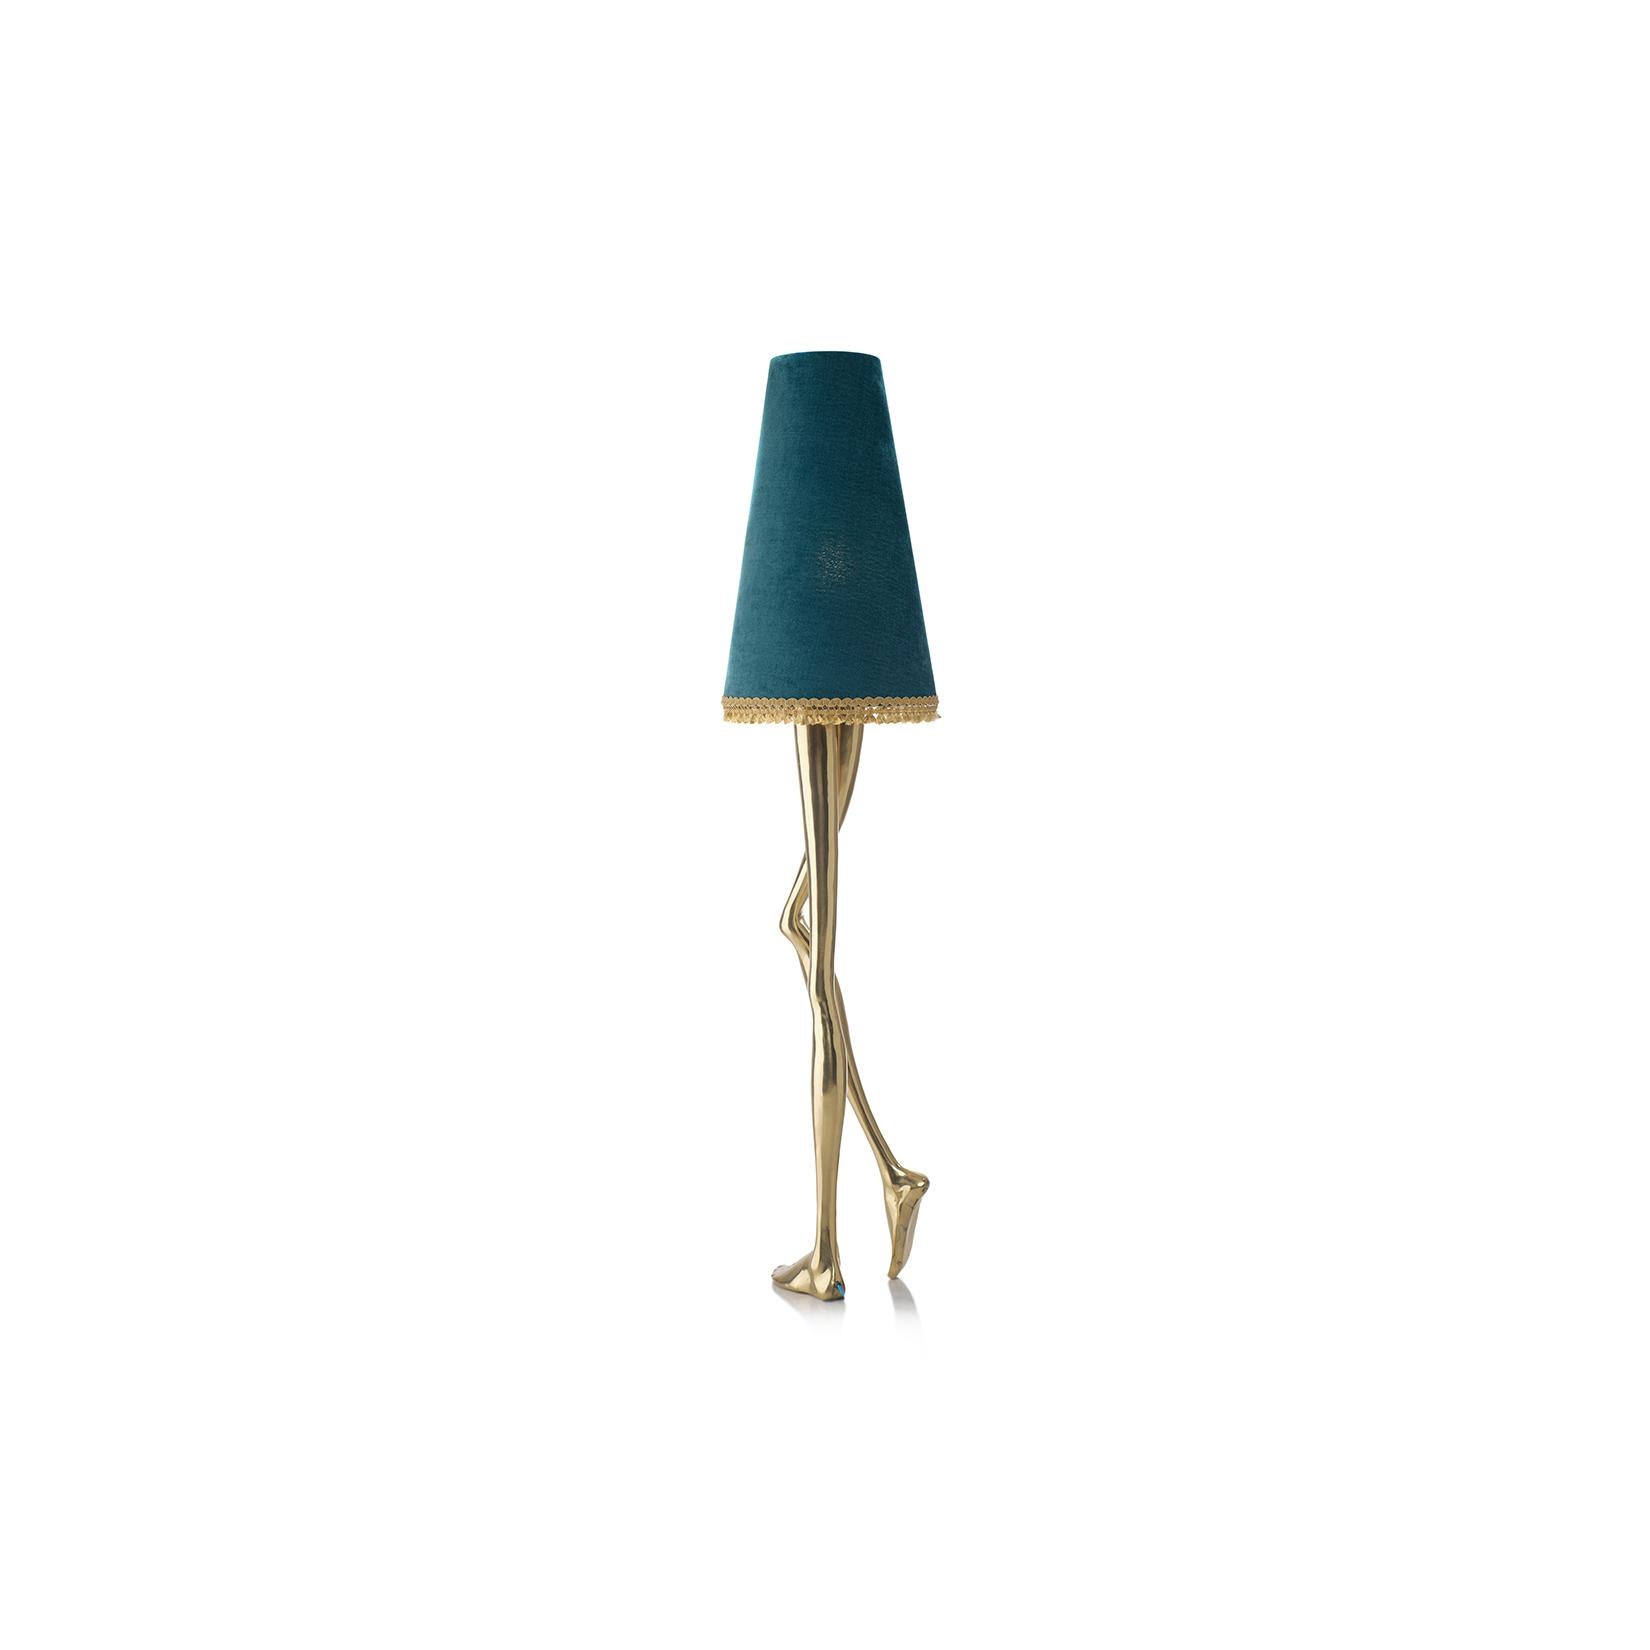 Portuguese Contemporary Monroe Floor Lamp Polished Brass Cast, Blue Lampshade, Art Lighting For Sale